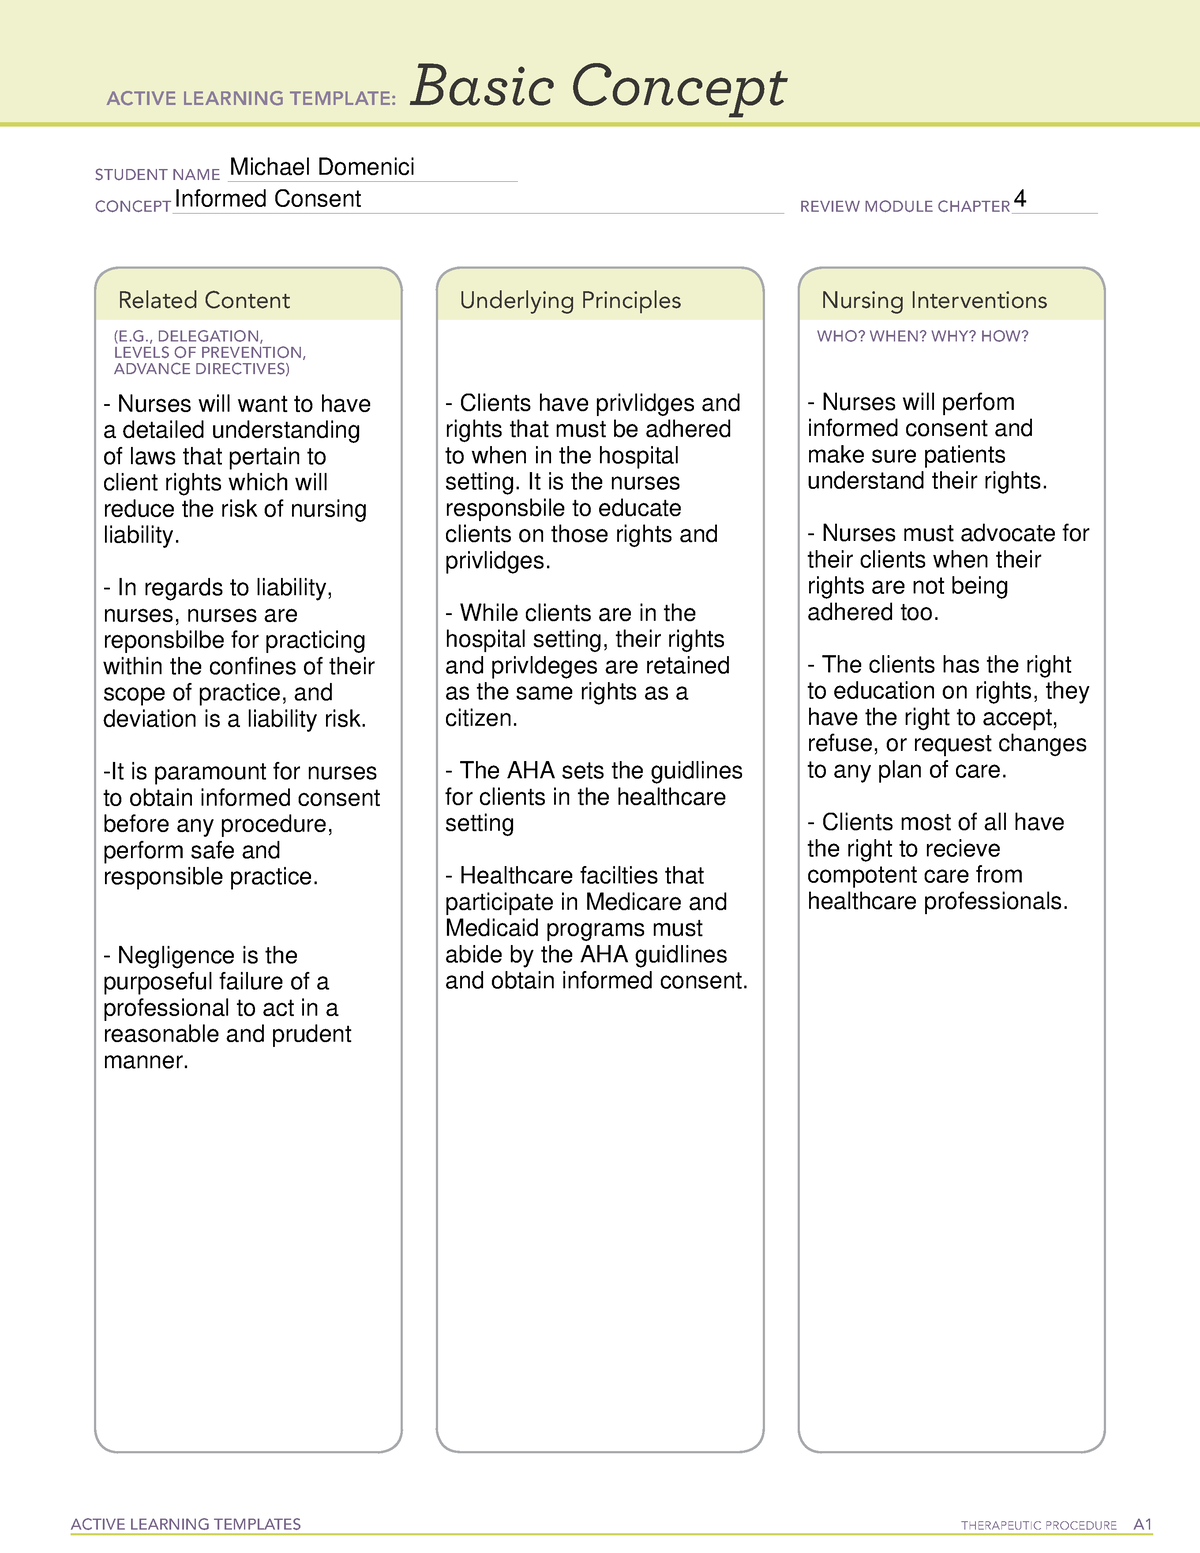 ATI Active Learning Template Basic Concept 7 ACTIVE LEARNING